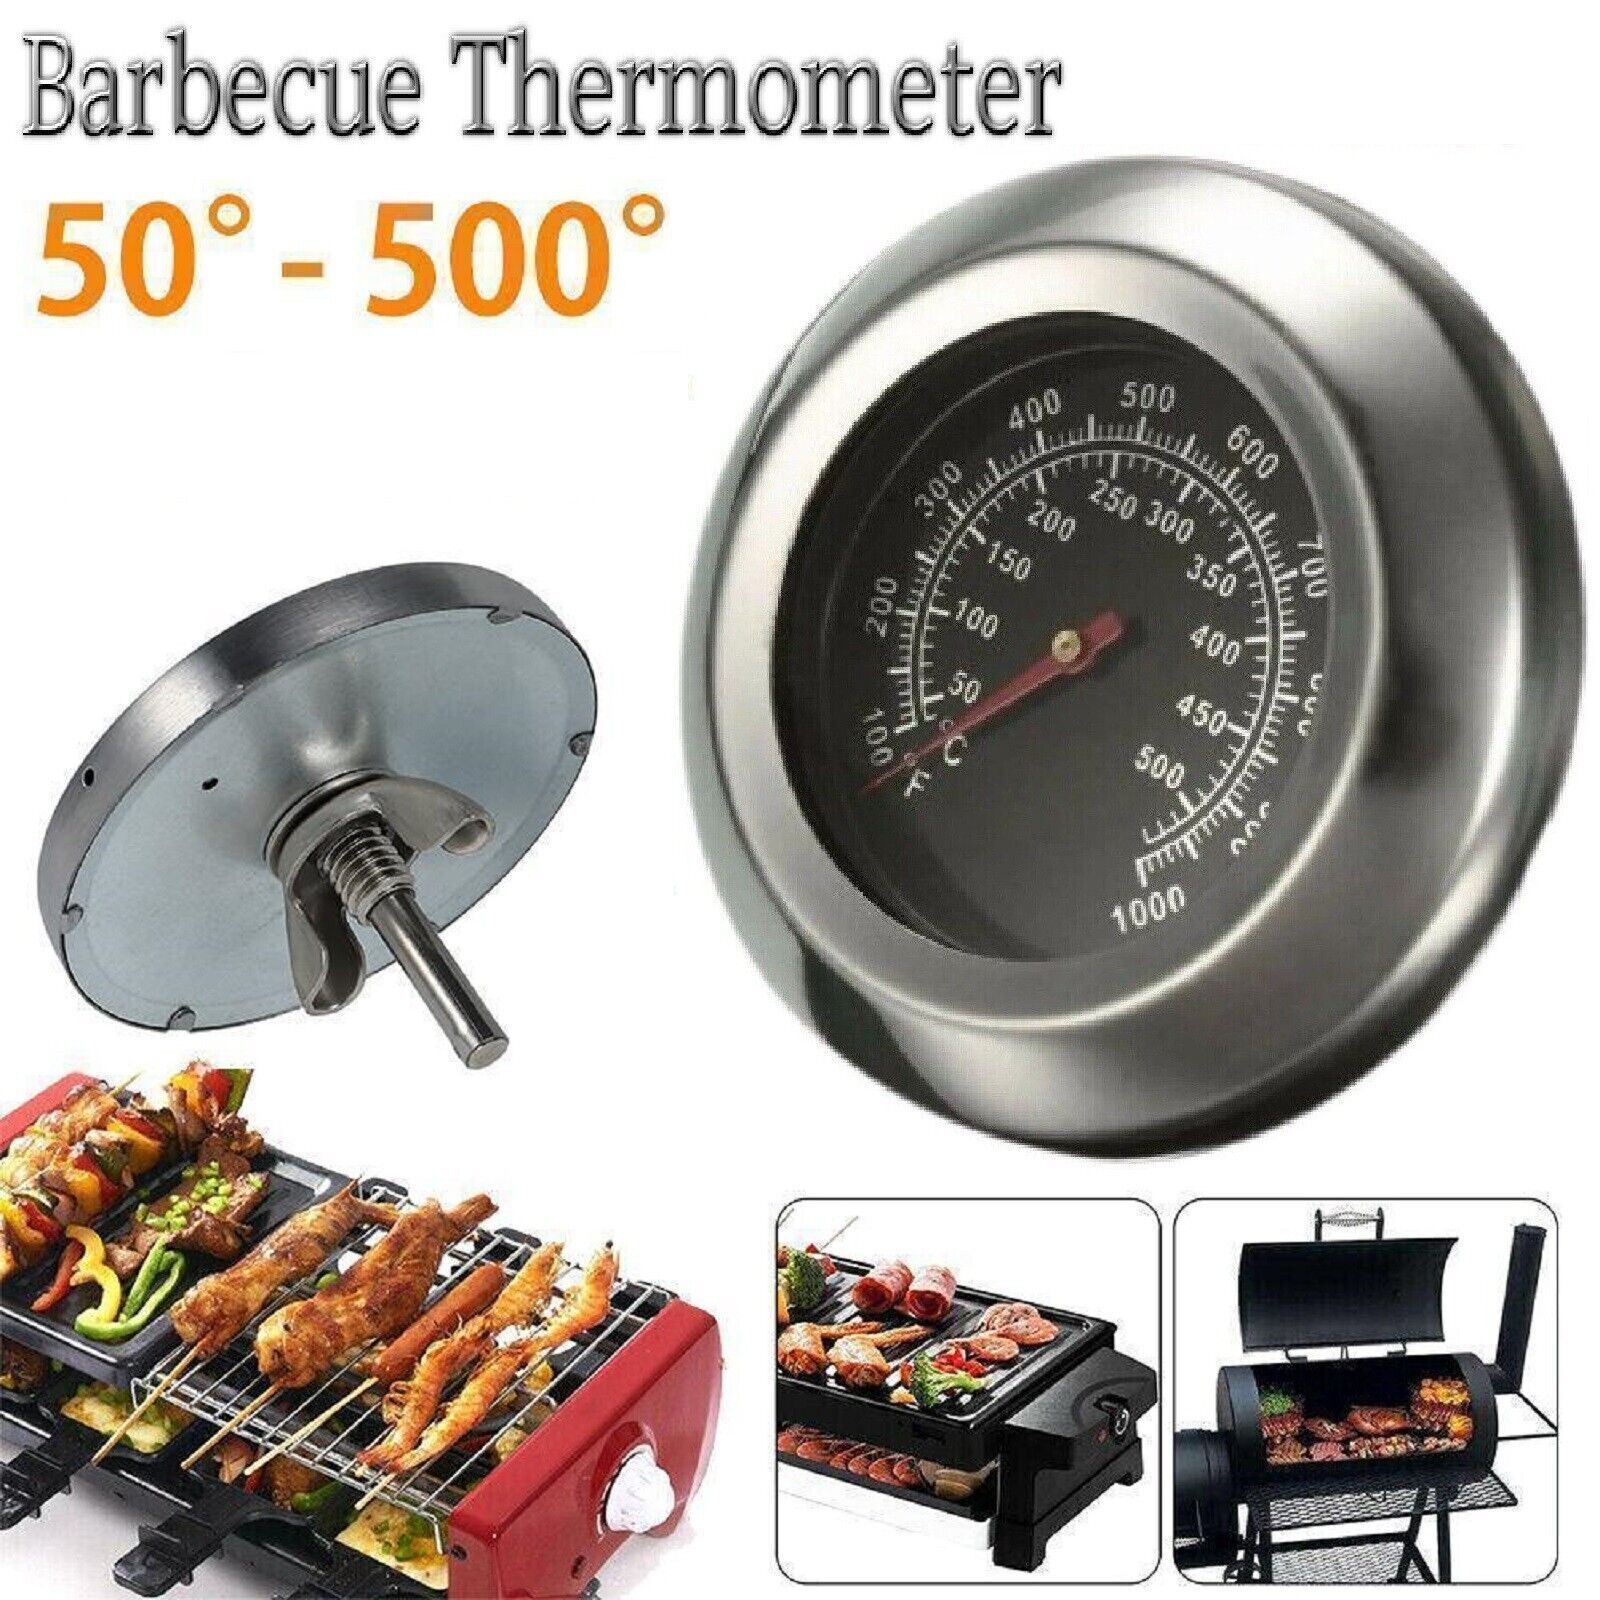 Barbecue Thermometer Oven Pit Temp Gauge 50-500℃ BBQ Smoker Grill Temperature